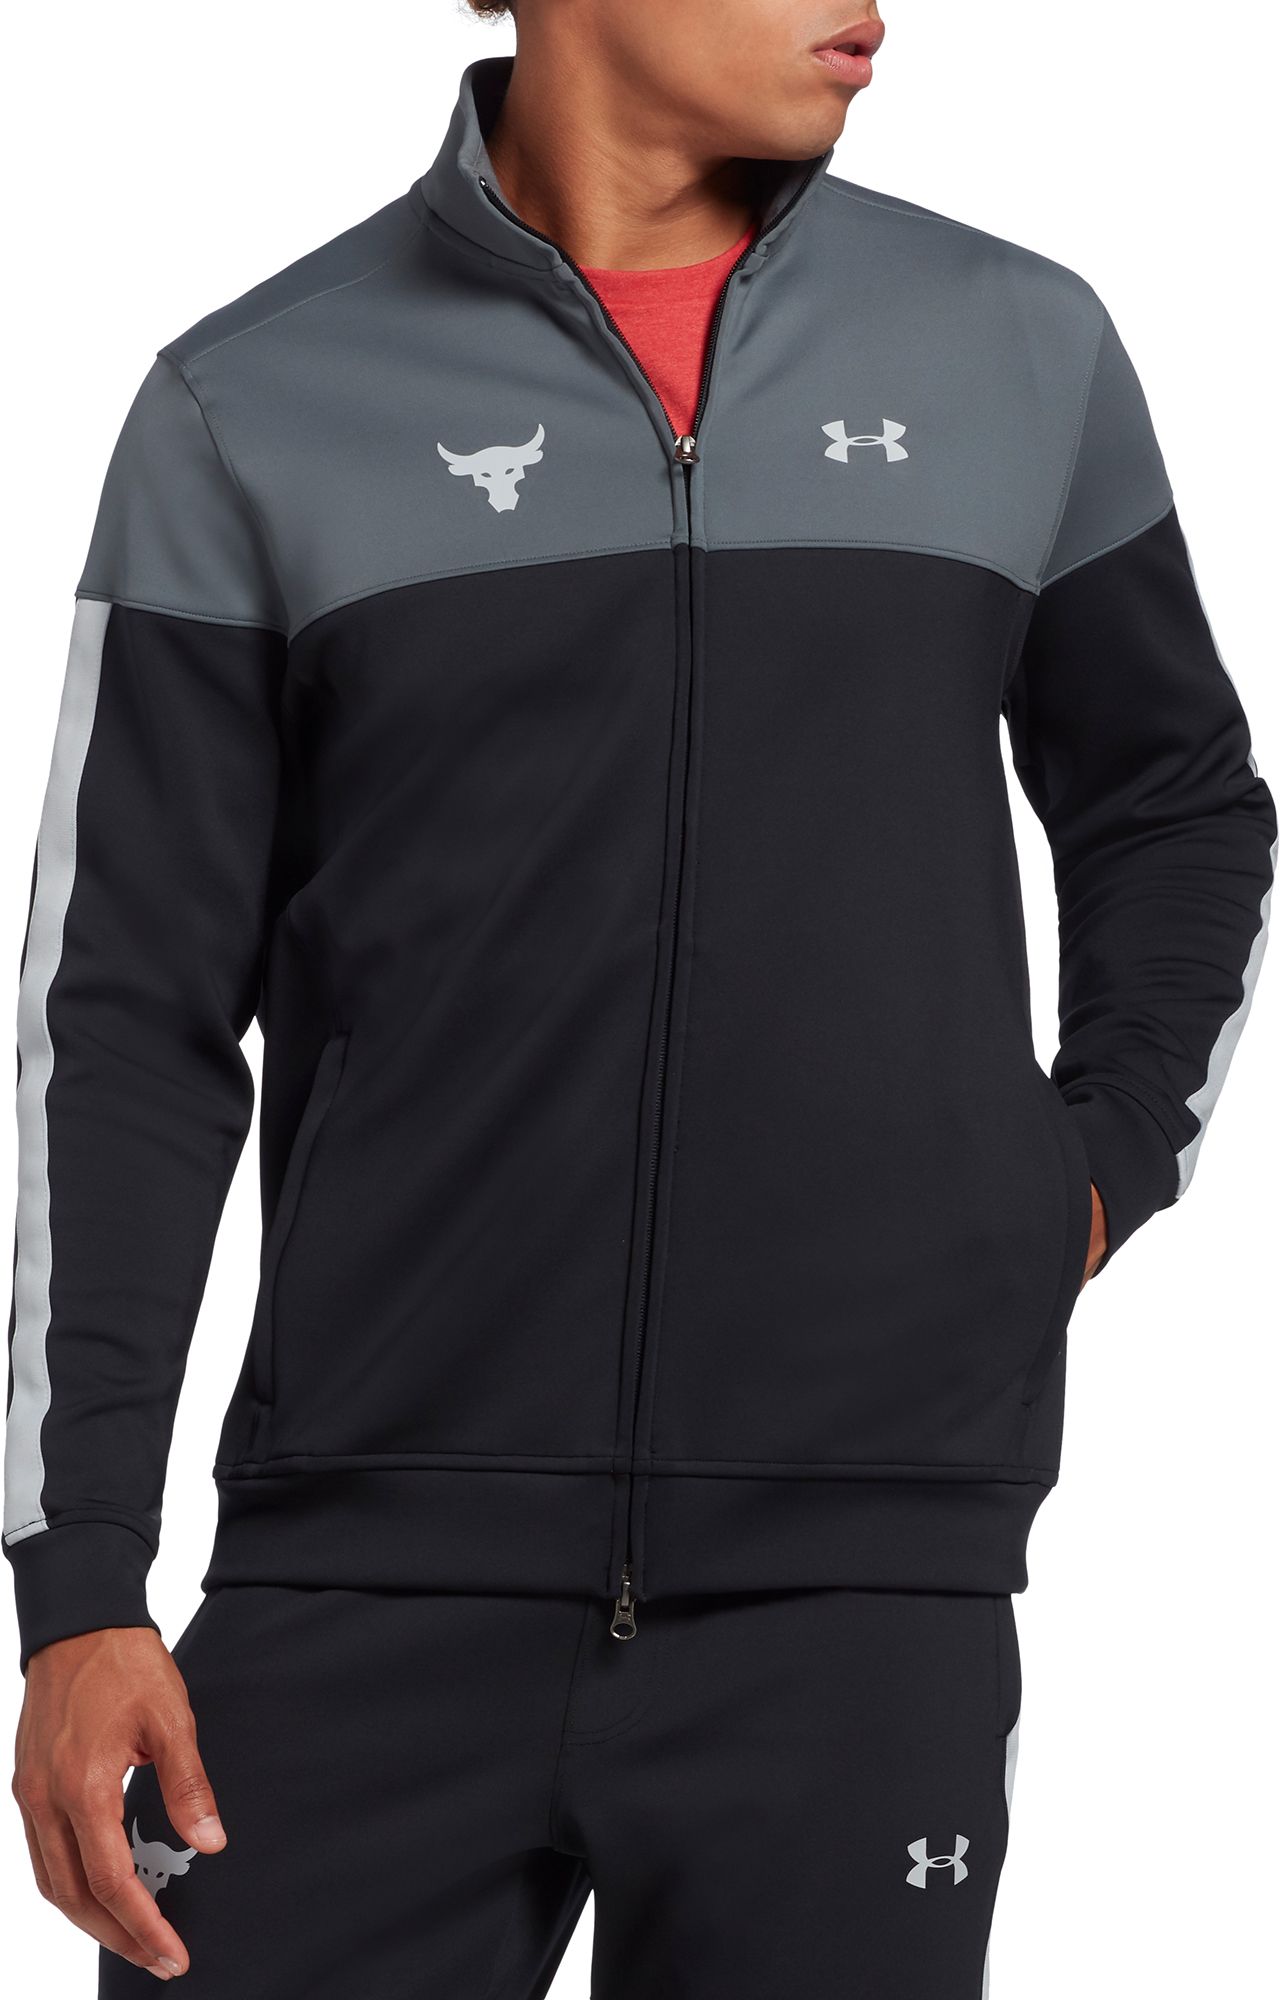 gray under armour jacket